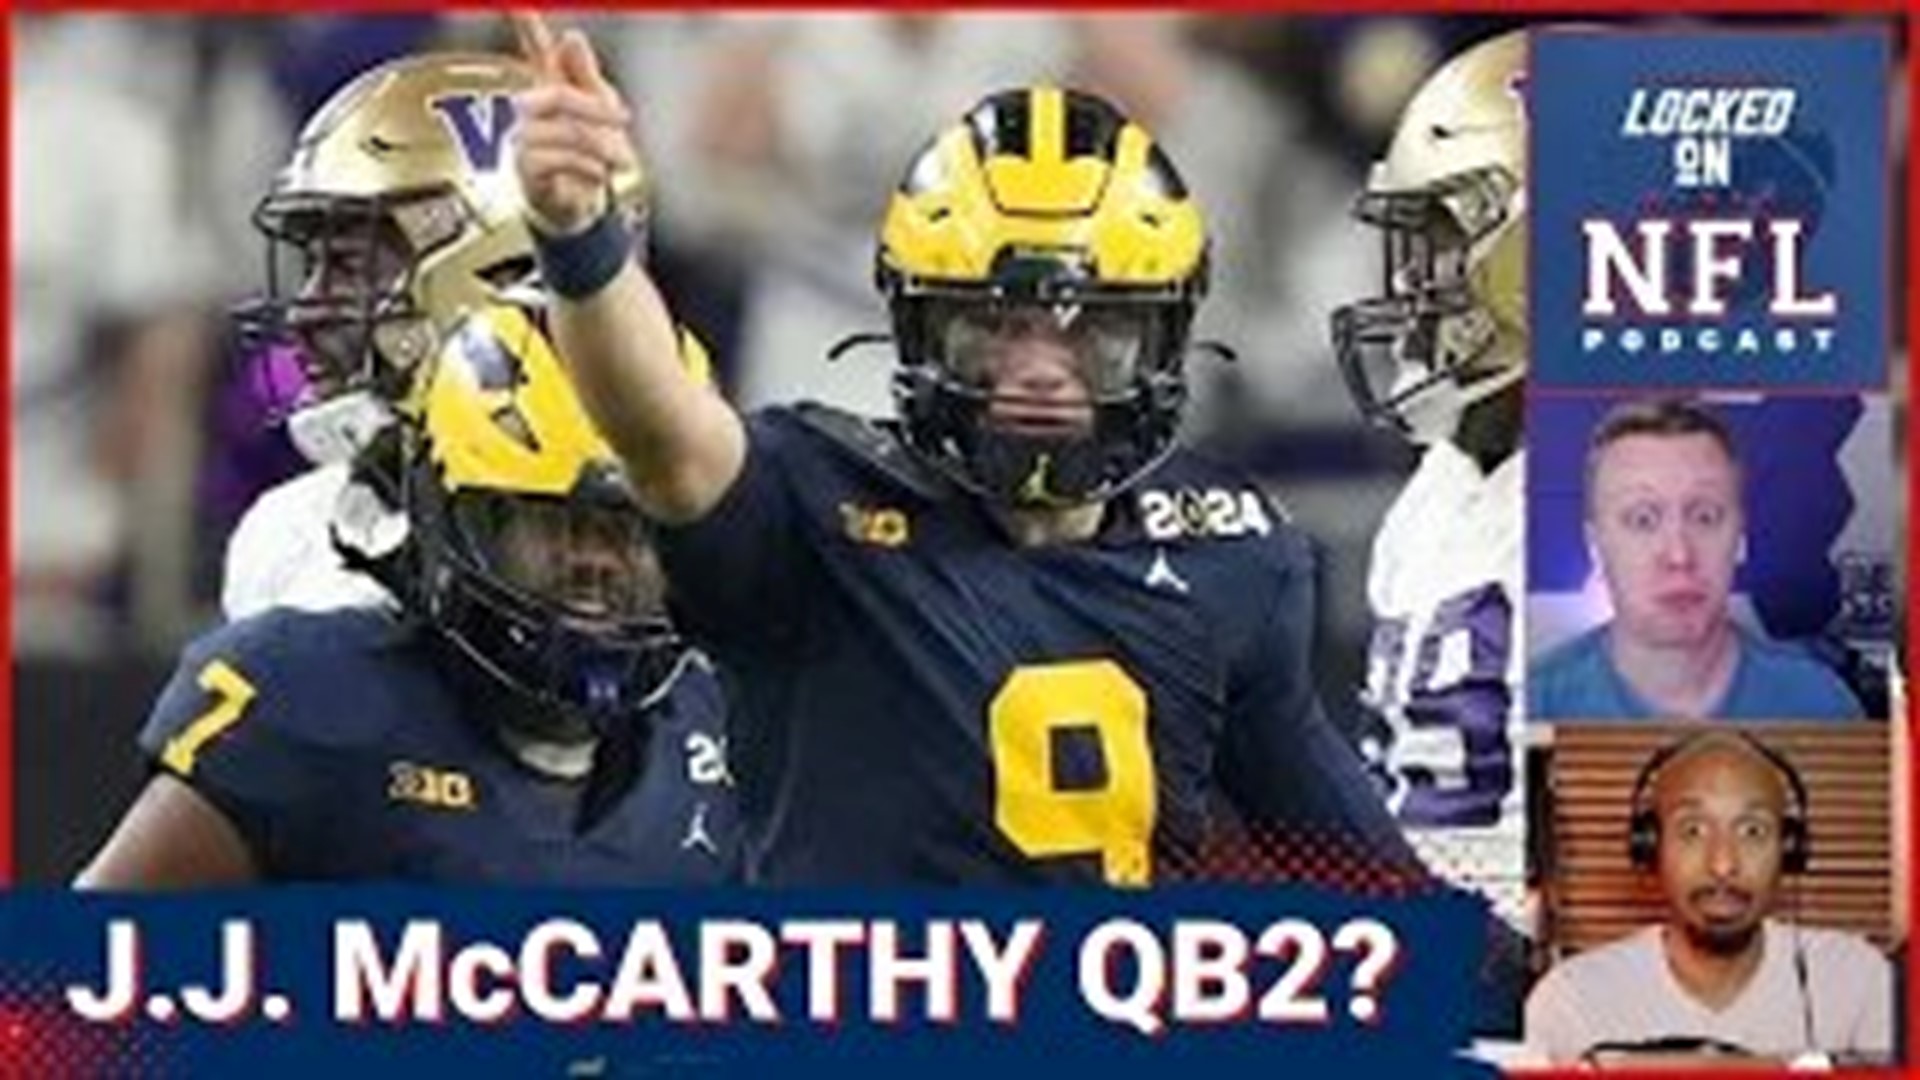 Between the Denver Broncos and the Washington Commanders, the NFL Draft rumor mill is rolling and Michigan quarterback J.J. McCarthy is the most popular name.